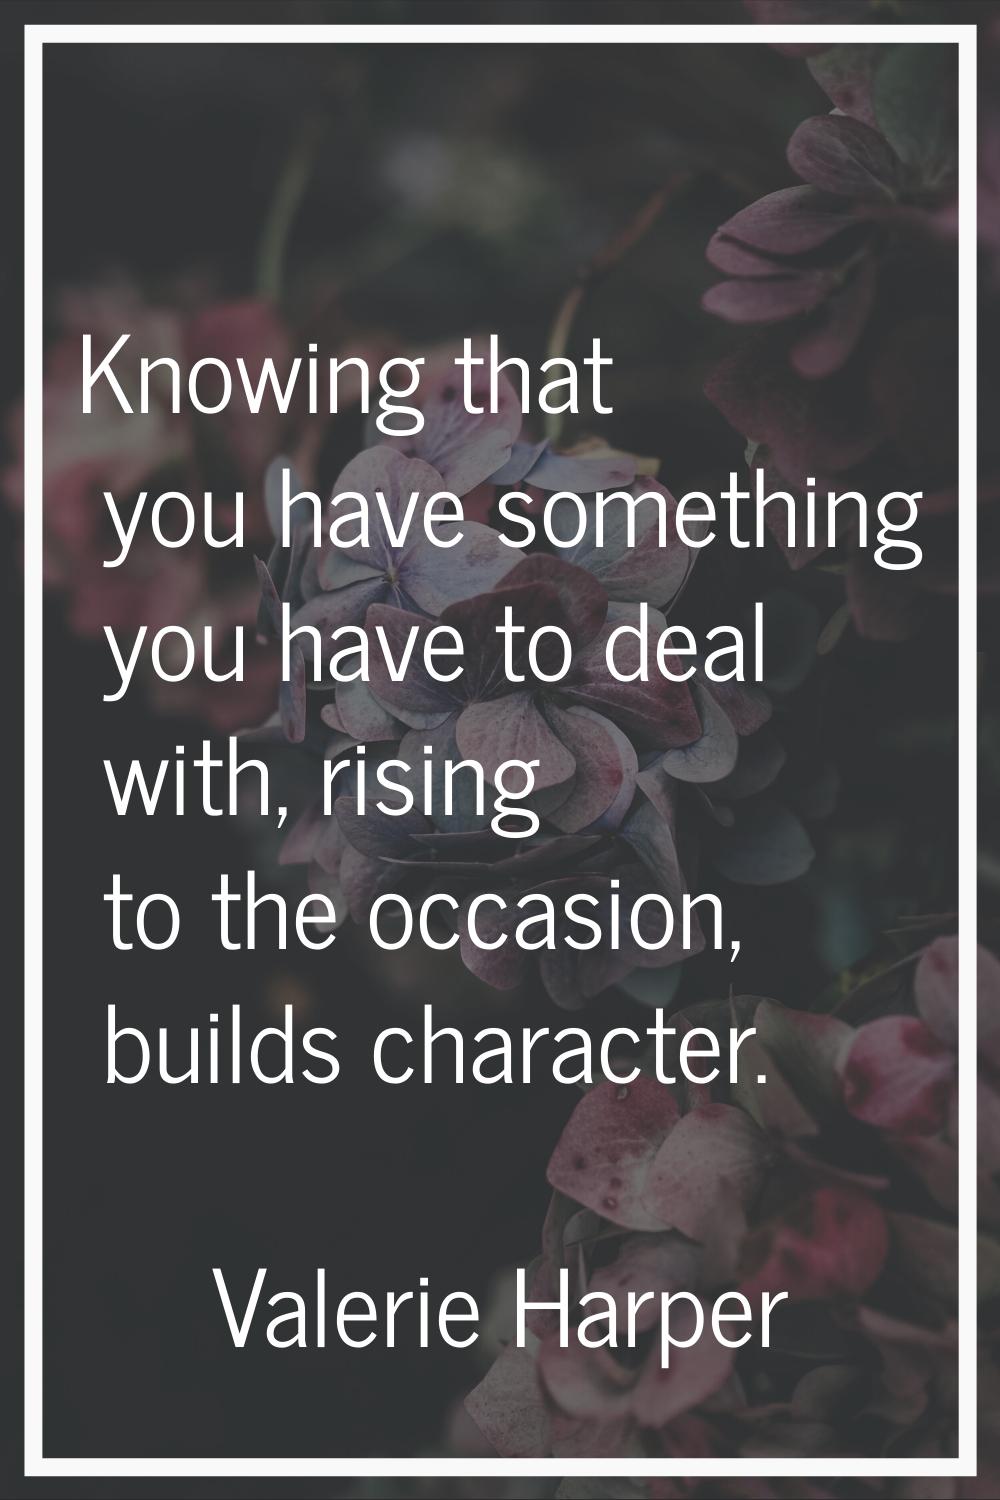 Knowing that you have something you have to deal with, rising to the occasion, builds character.